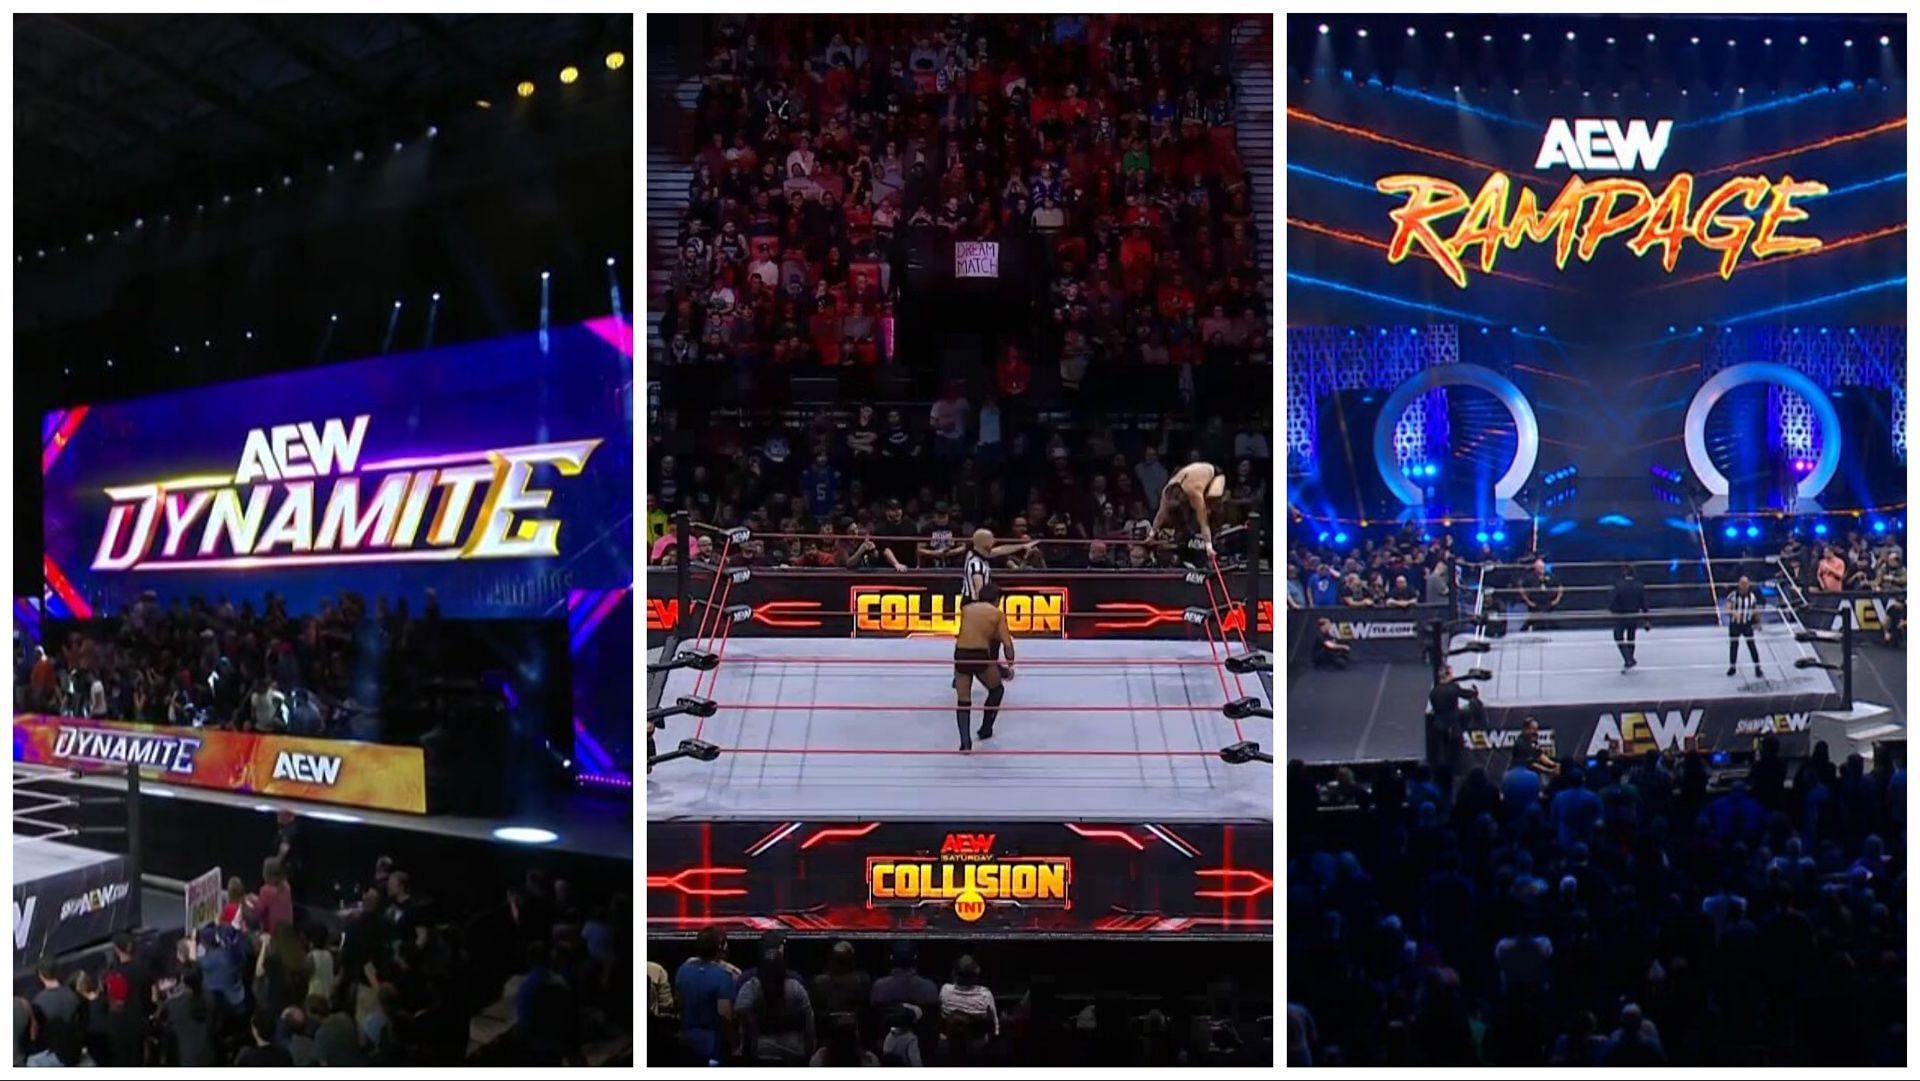 Stages and rings for AEW Dynamite, Collision, and Rampage